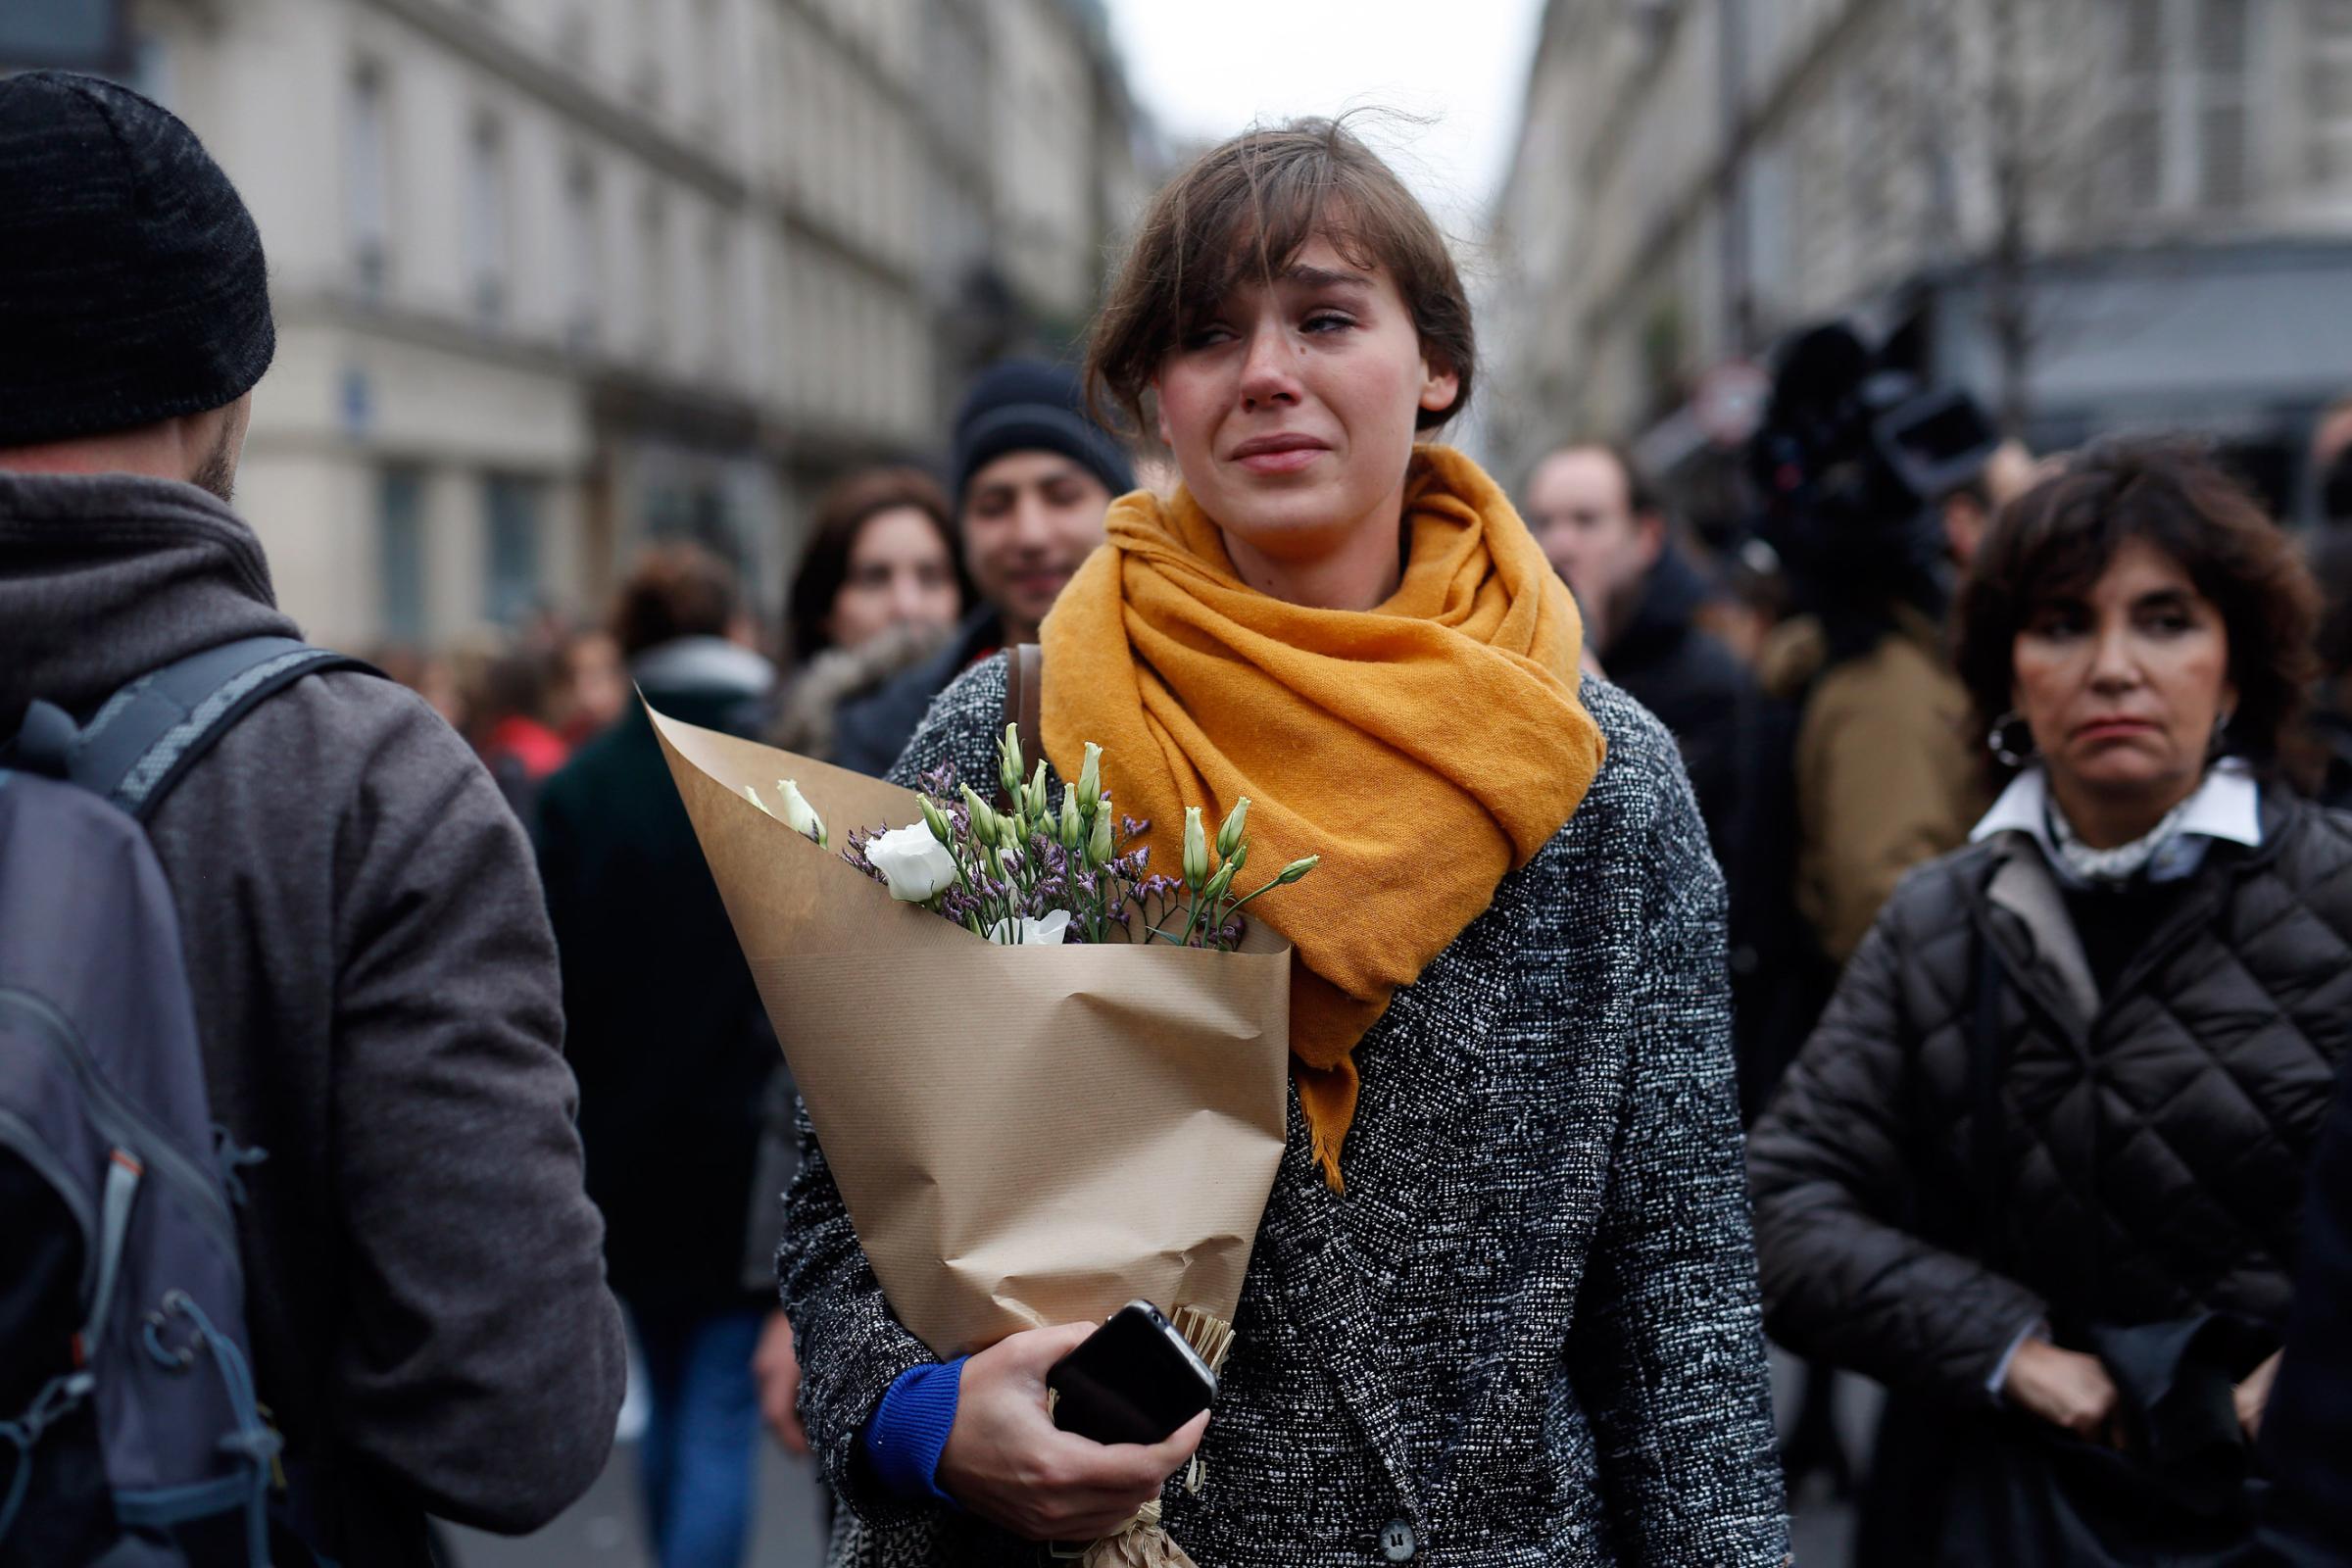 A woman carrying flowers cries in front of the Carillon cafe and the Petit Cambodge restaurant in Paris on Nov. 14, 2015.